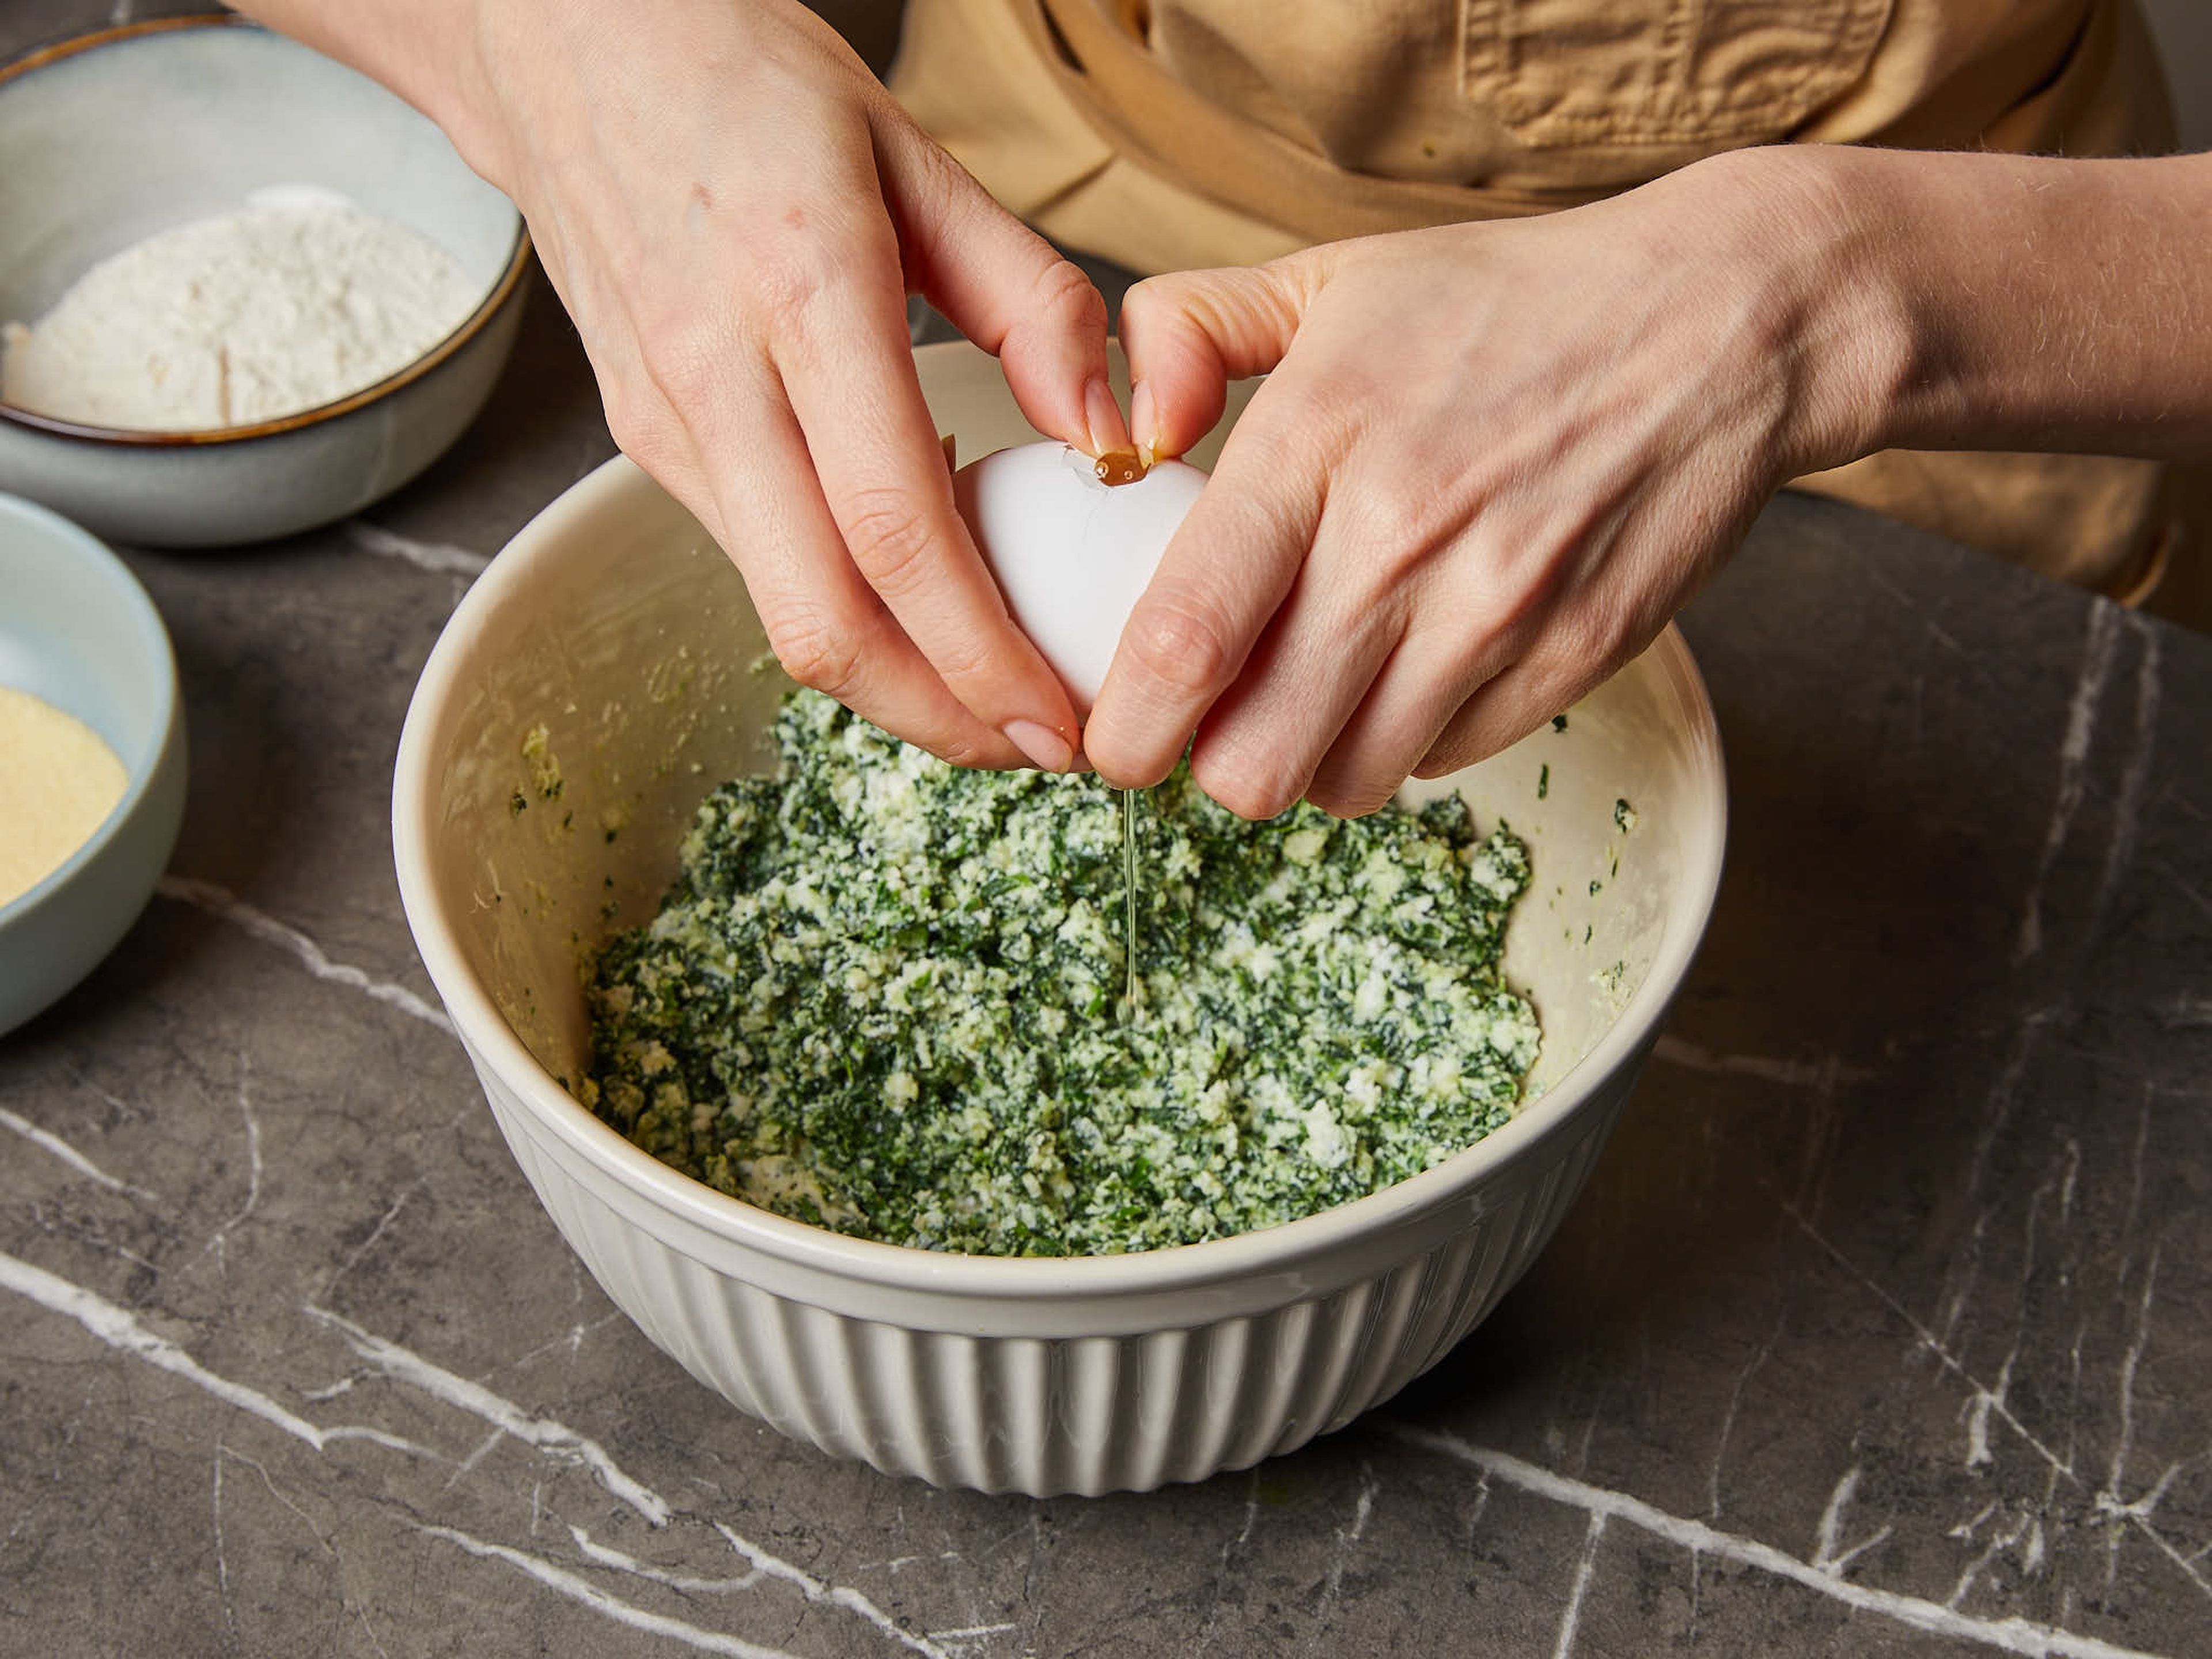 To a mixing bowl, add the wild garlic mix, parmesan and strained ricotta, then stir to combine and work in the egg. Season well with salt, pepper and nutmeg. Gradually mix in the flour and semolina until you have a uniform dough, without overmixing it.